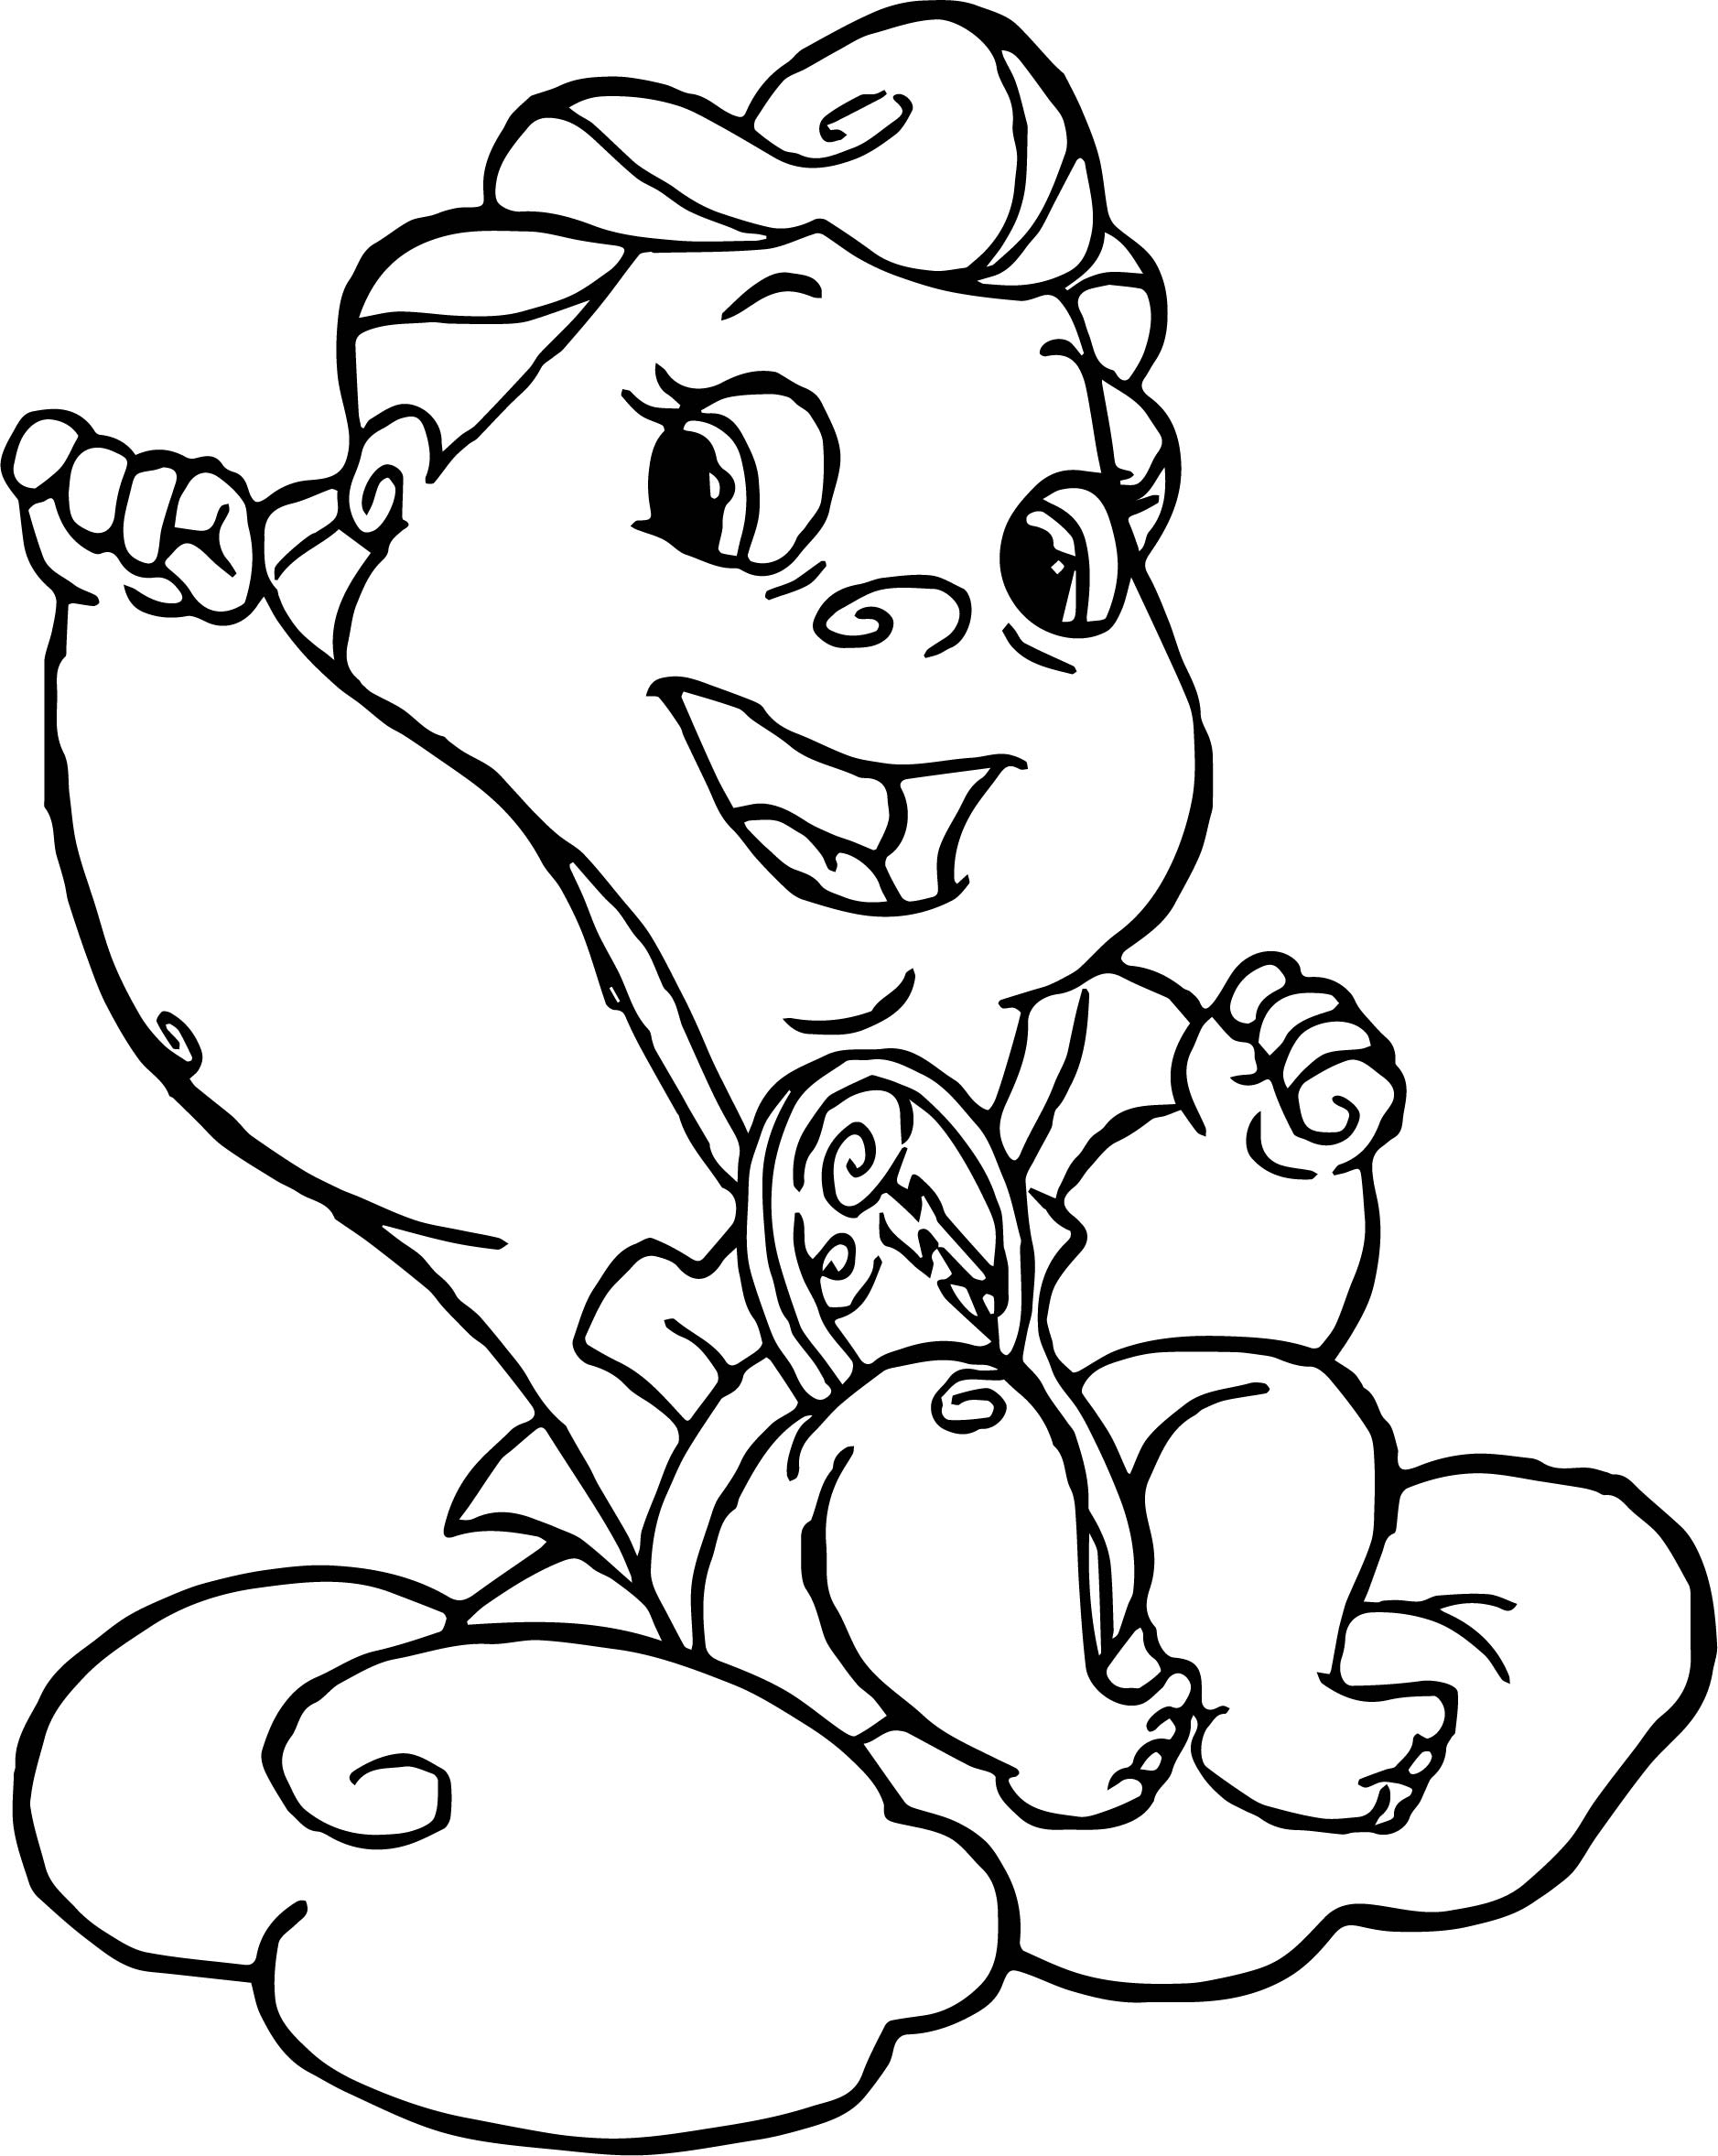 Baby Hercules and Baby Pegasus Give Coloring Pages